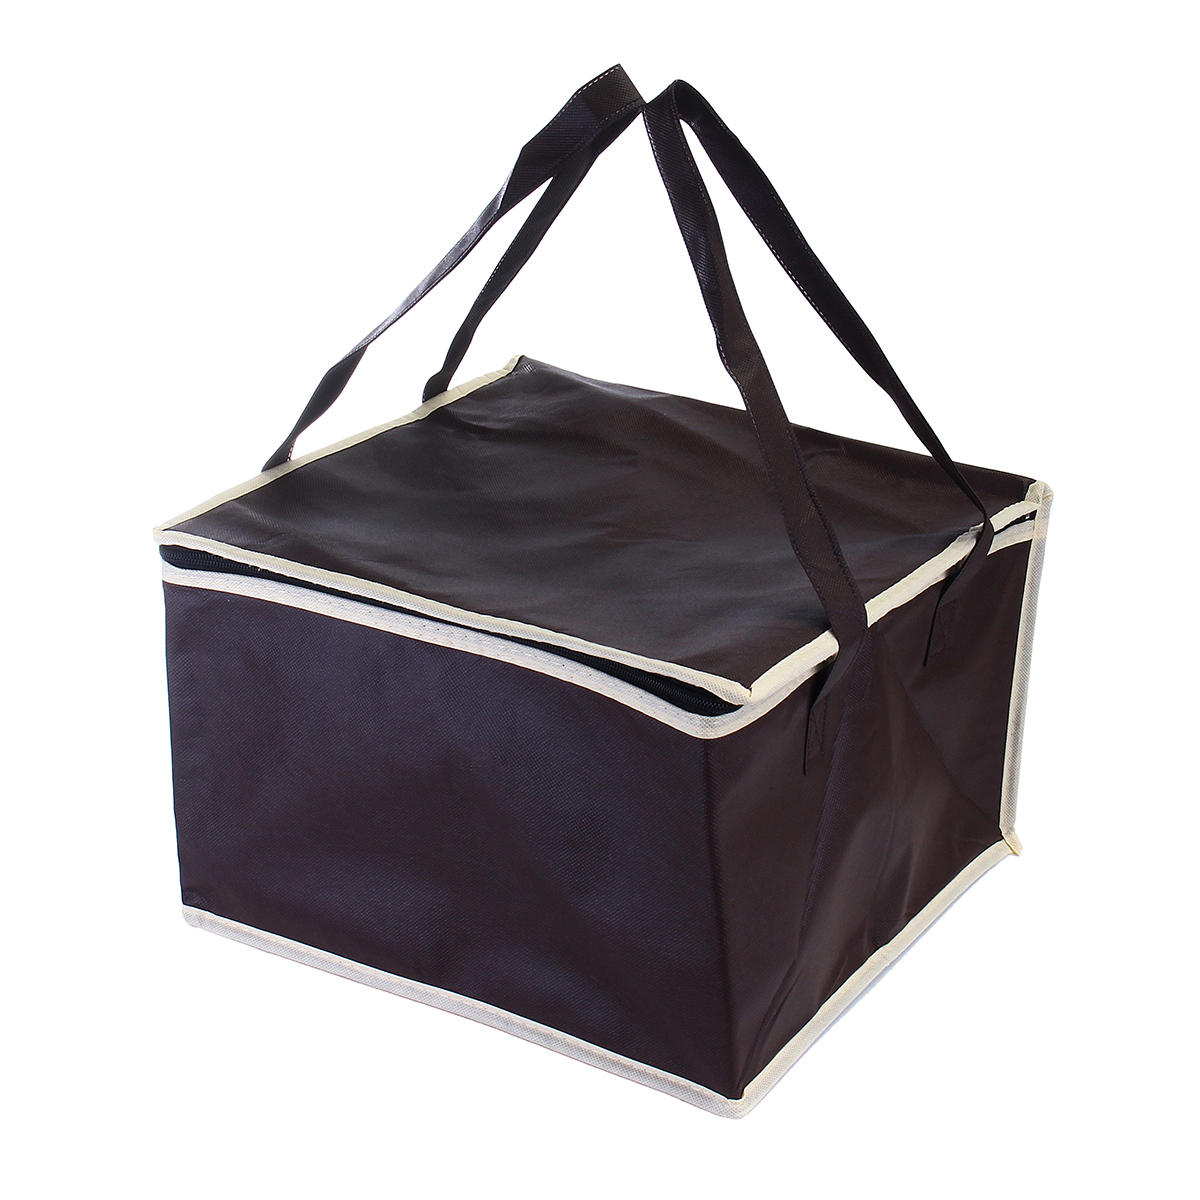 6-Inch-Non-woven-Fresh-keeping-Tote-Bag-with-Zipper-Cake-Picnic-Lunch-Bag-Reusable-Grocery-Bag-1353006-7